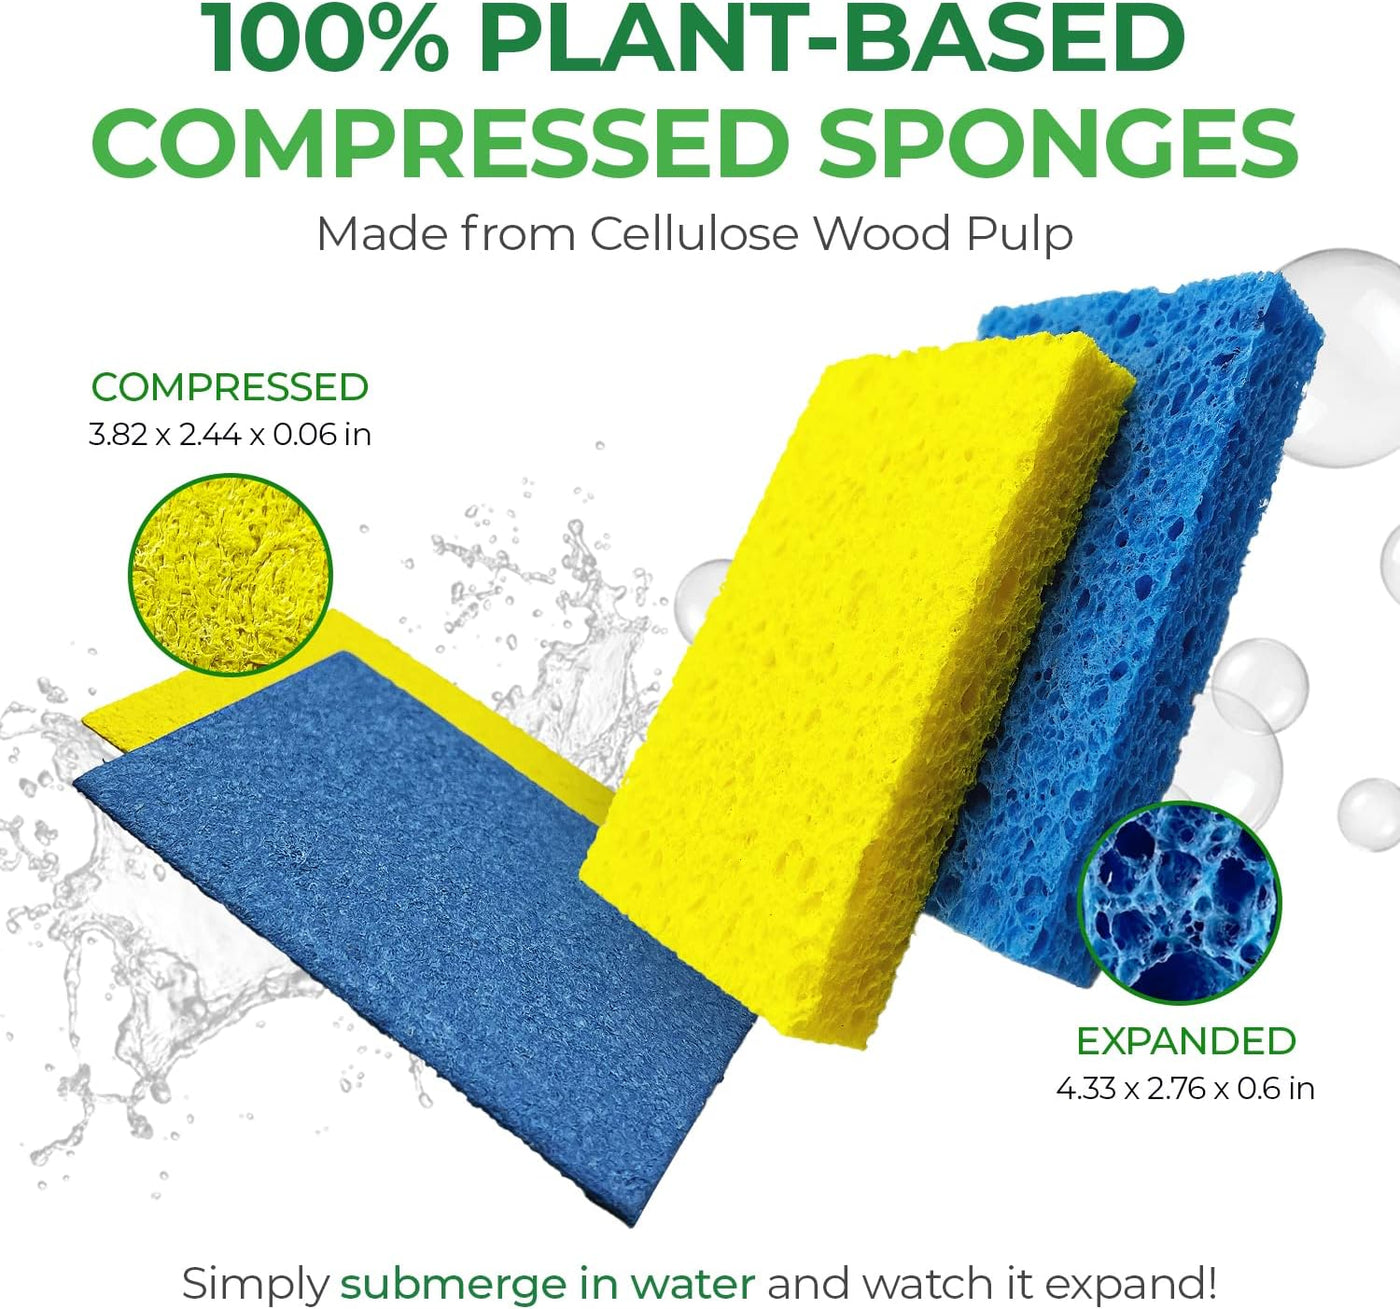 Biodegradable Natural Kitchen Sponge - Compostable Cellulose and Cocon –  Airnex